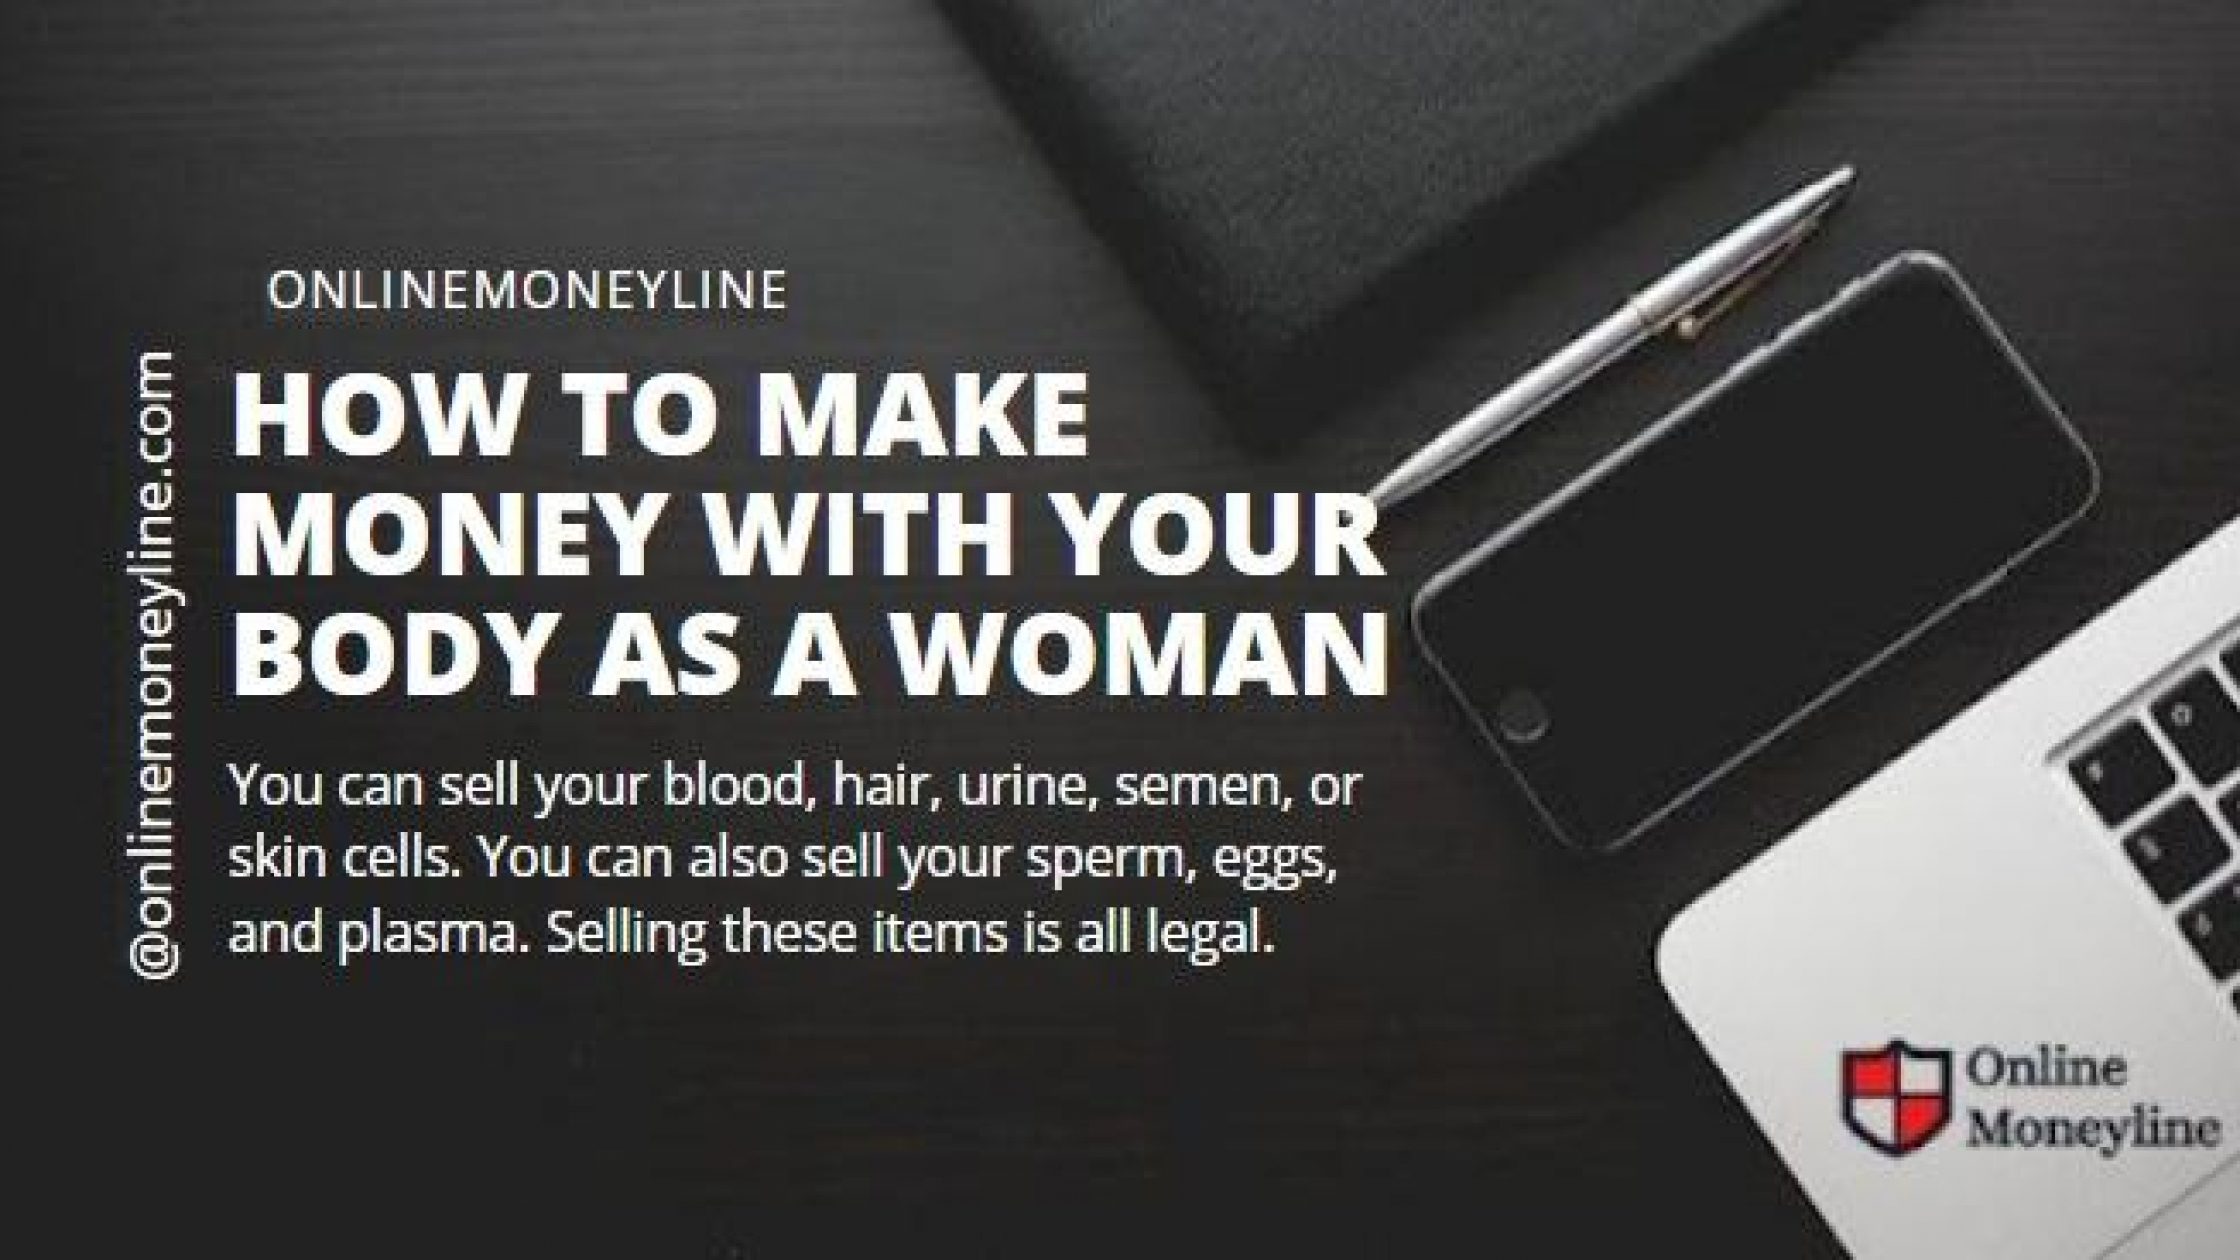 How To Make Money With Your Body As A Woman